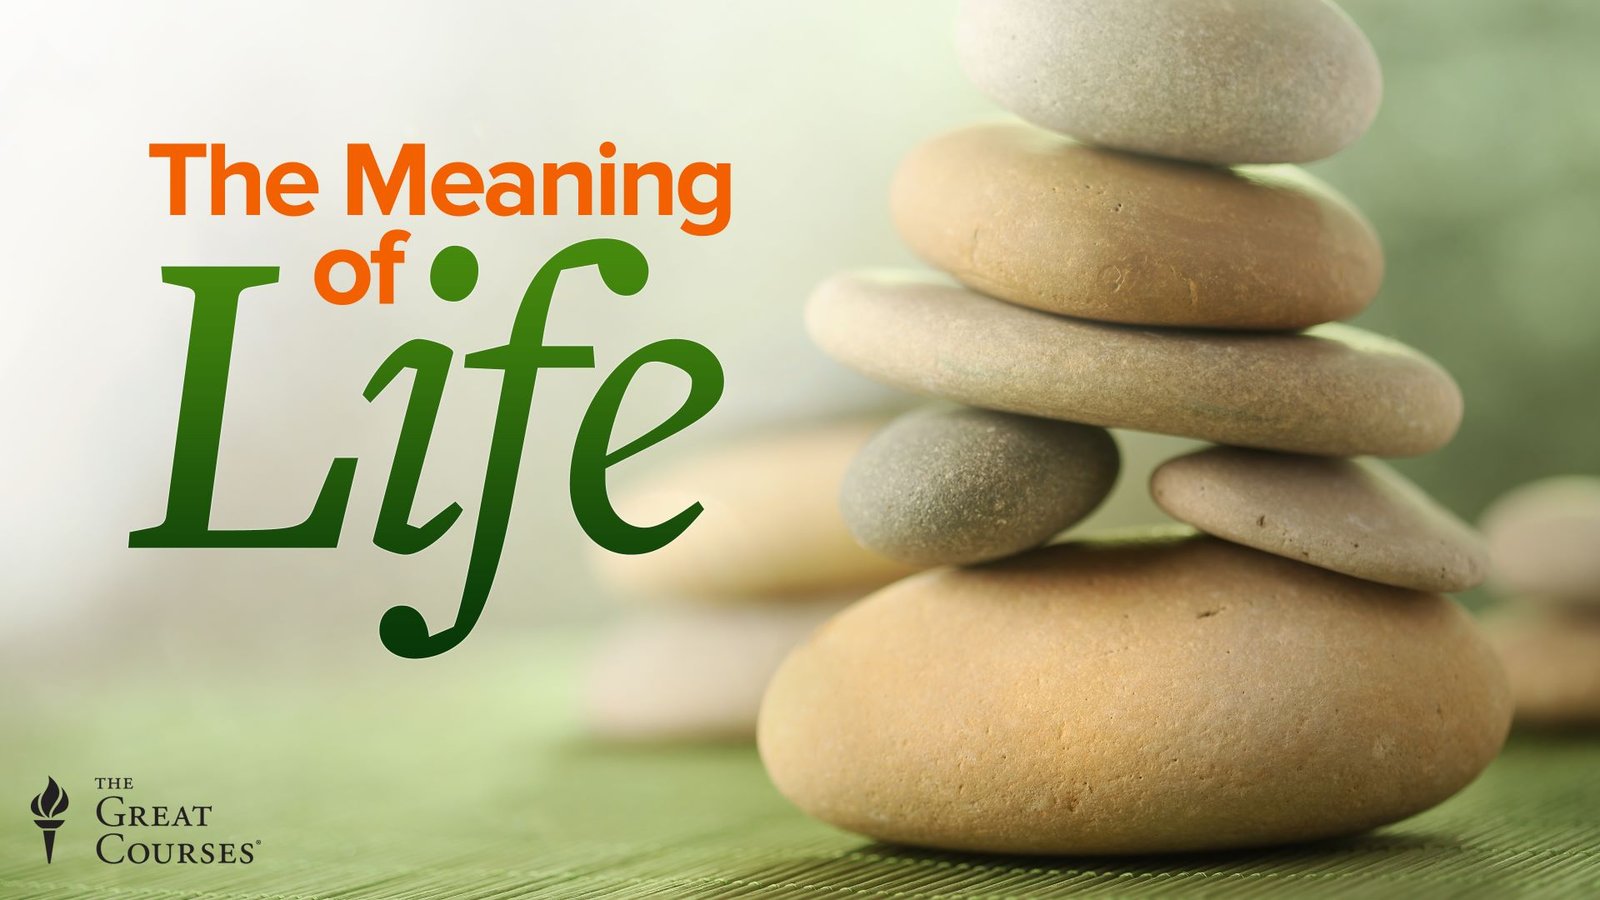 The Meaning of Life - Perspectives from the World's Great Intellectual Traditions